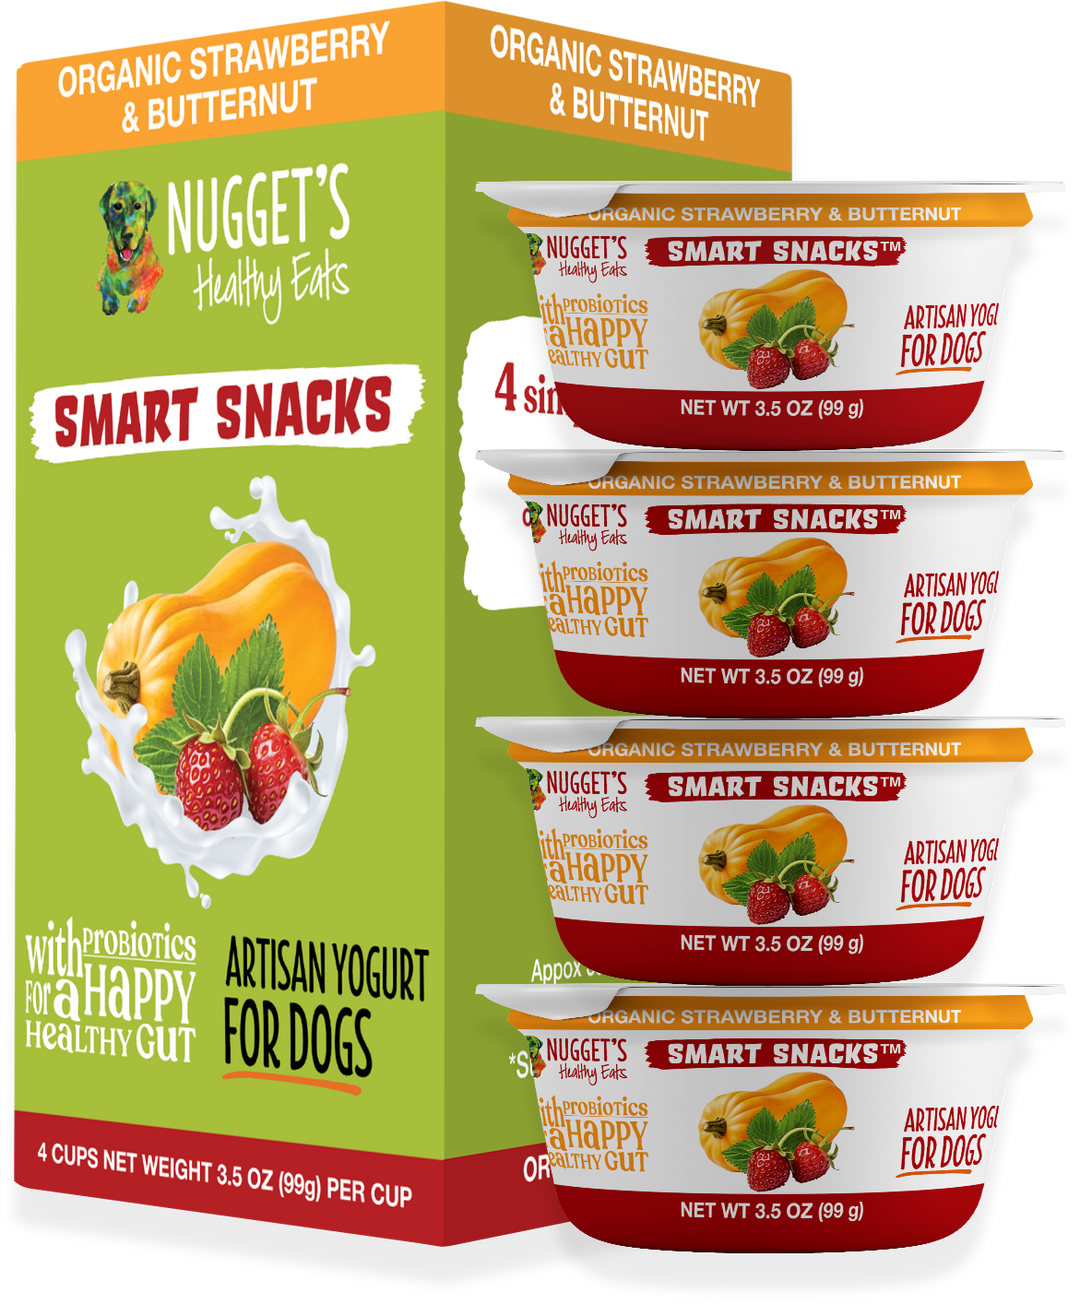 Nugget's Healthy Eats - Dog Artisan Yogurt with Strawberries (One 3.5 oz cup)